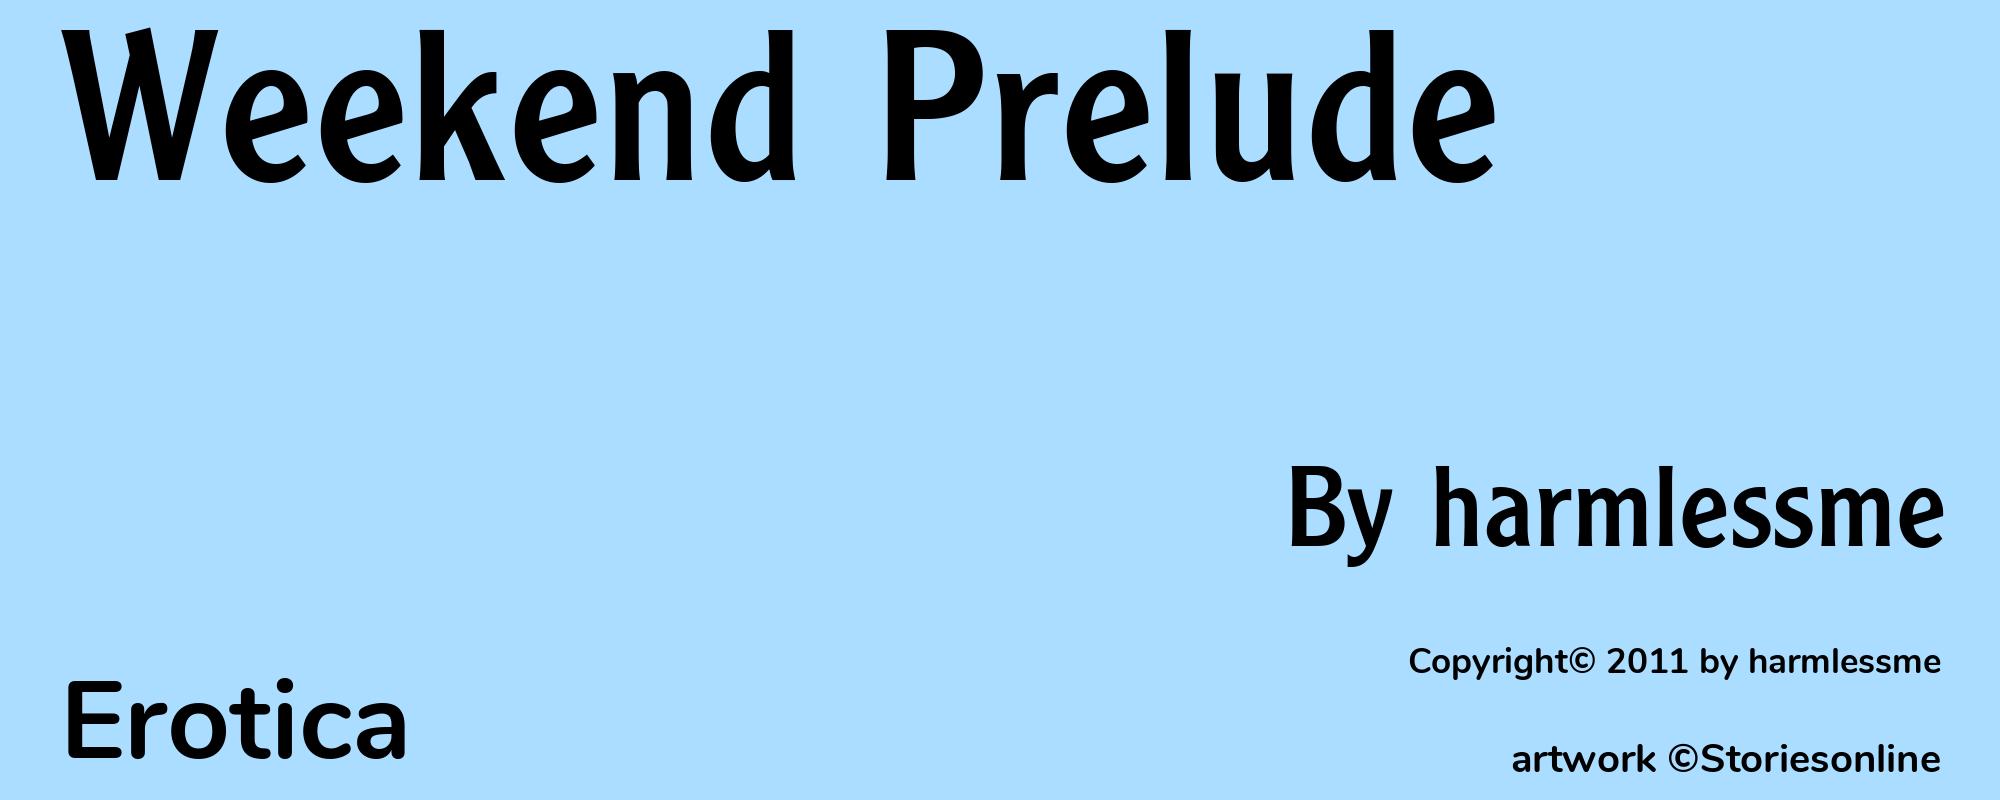 Weekend Prelude - Cover